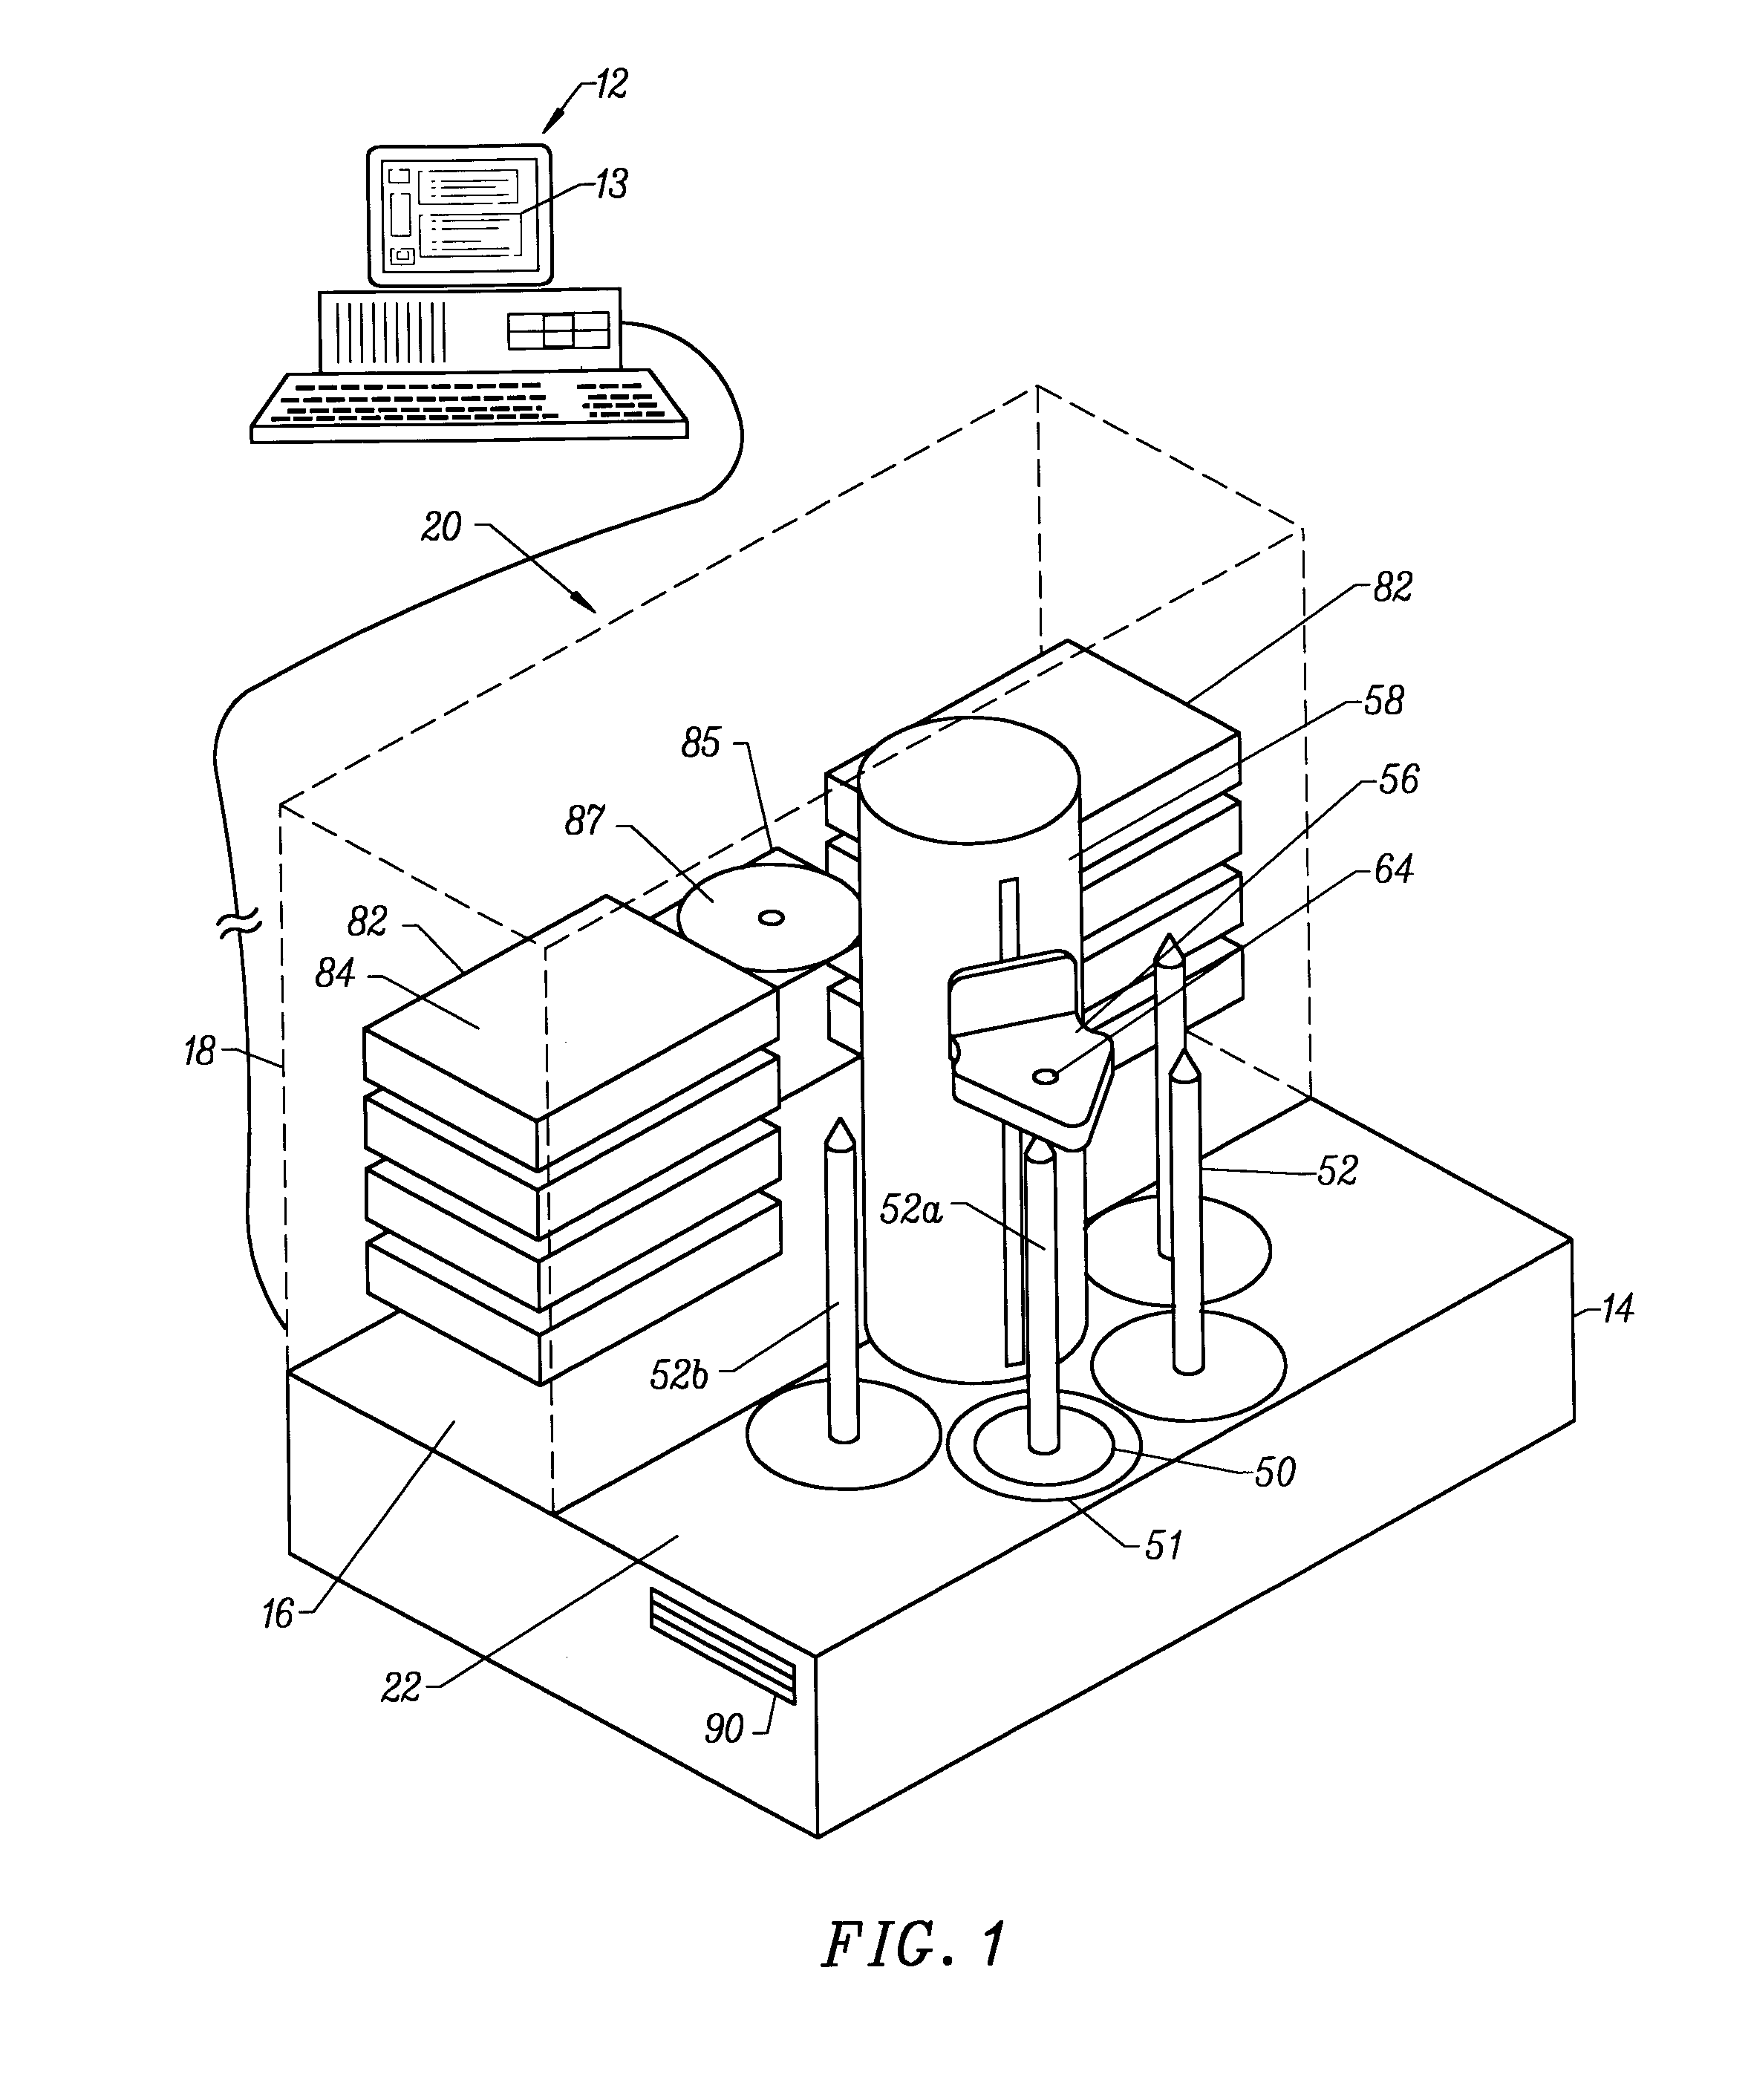 Programmable self-operating compact disk duplication system